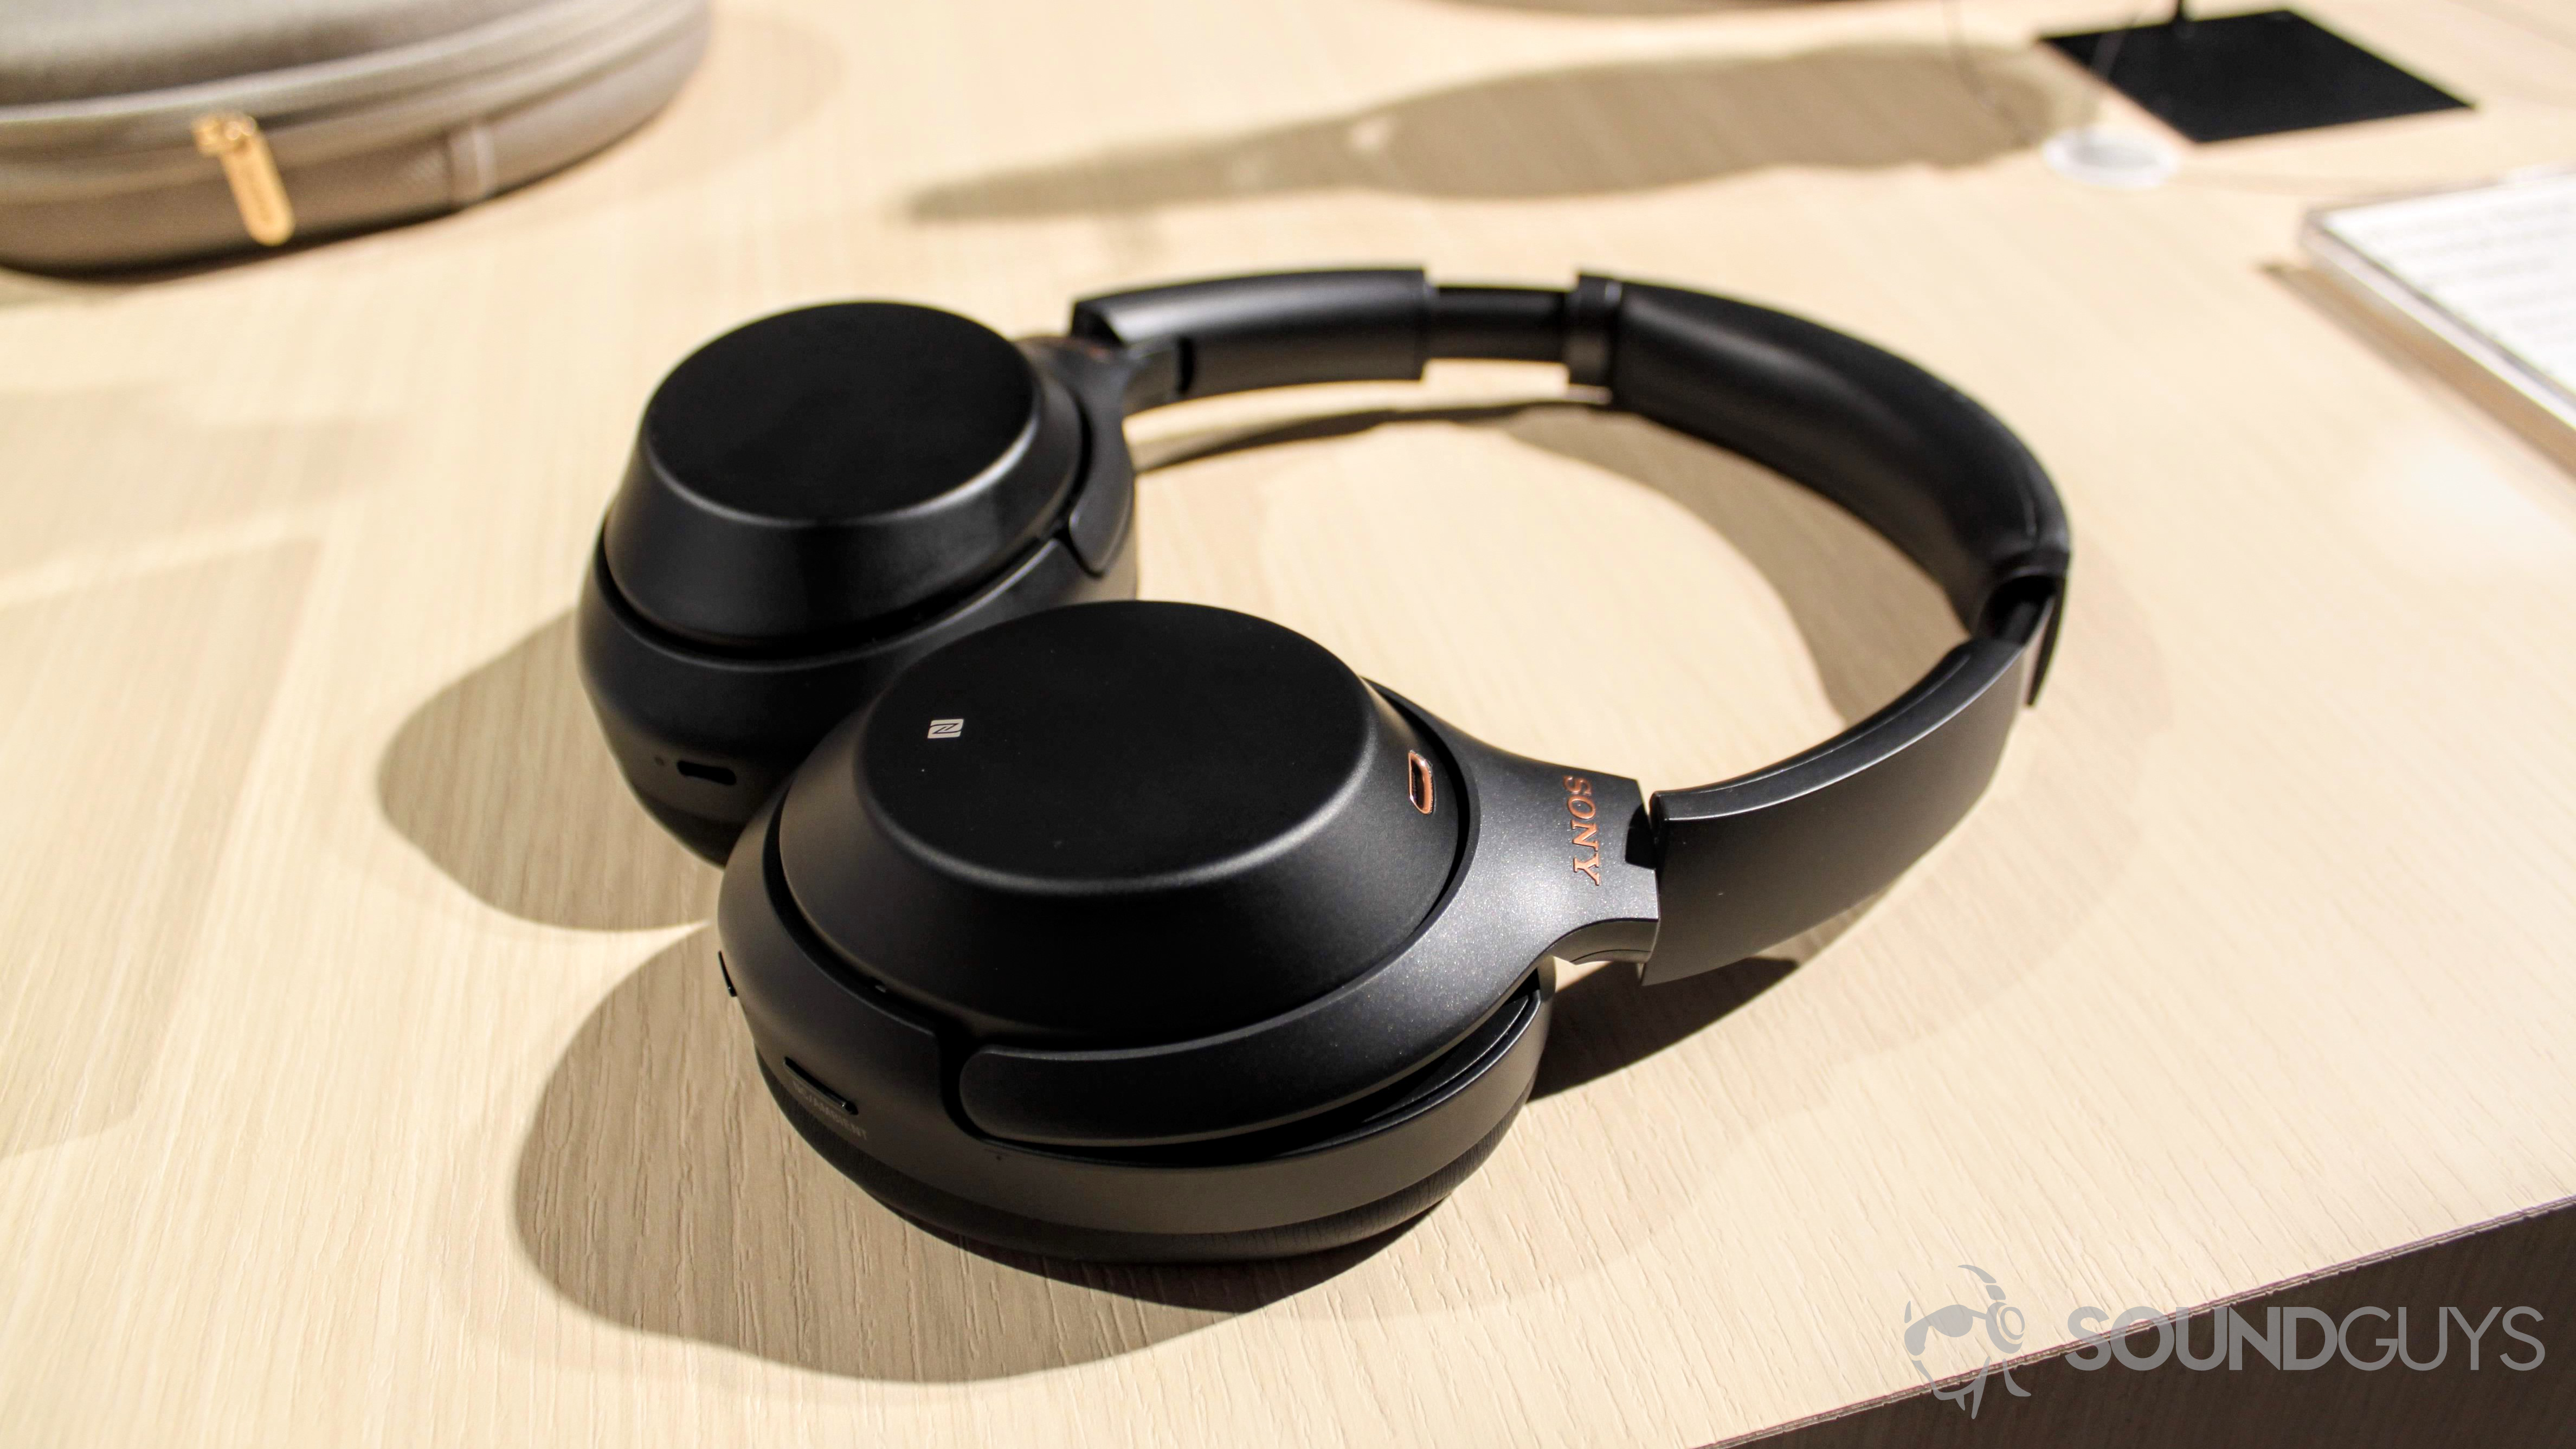 Sony WH-1000XM3 headphones with earpads facing down on a table.